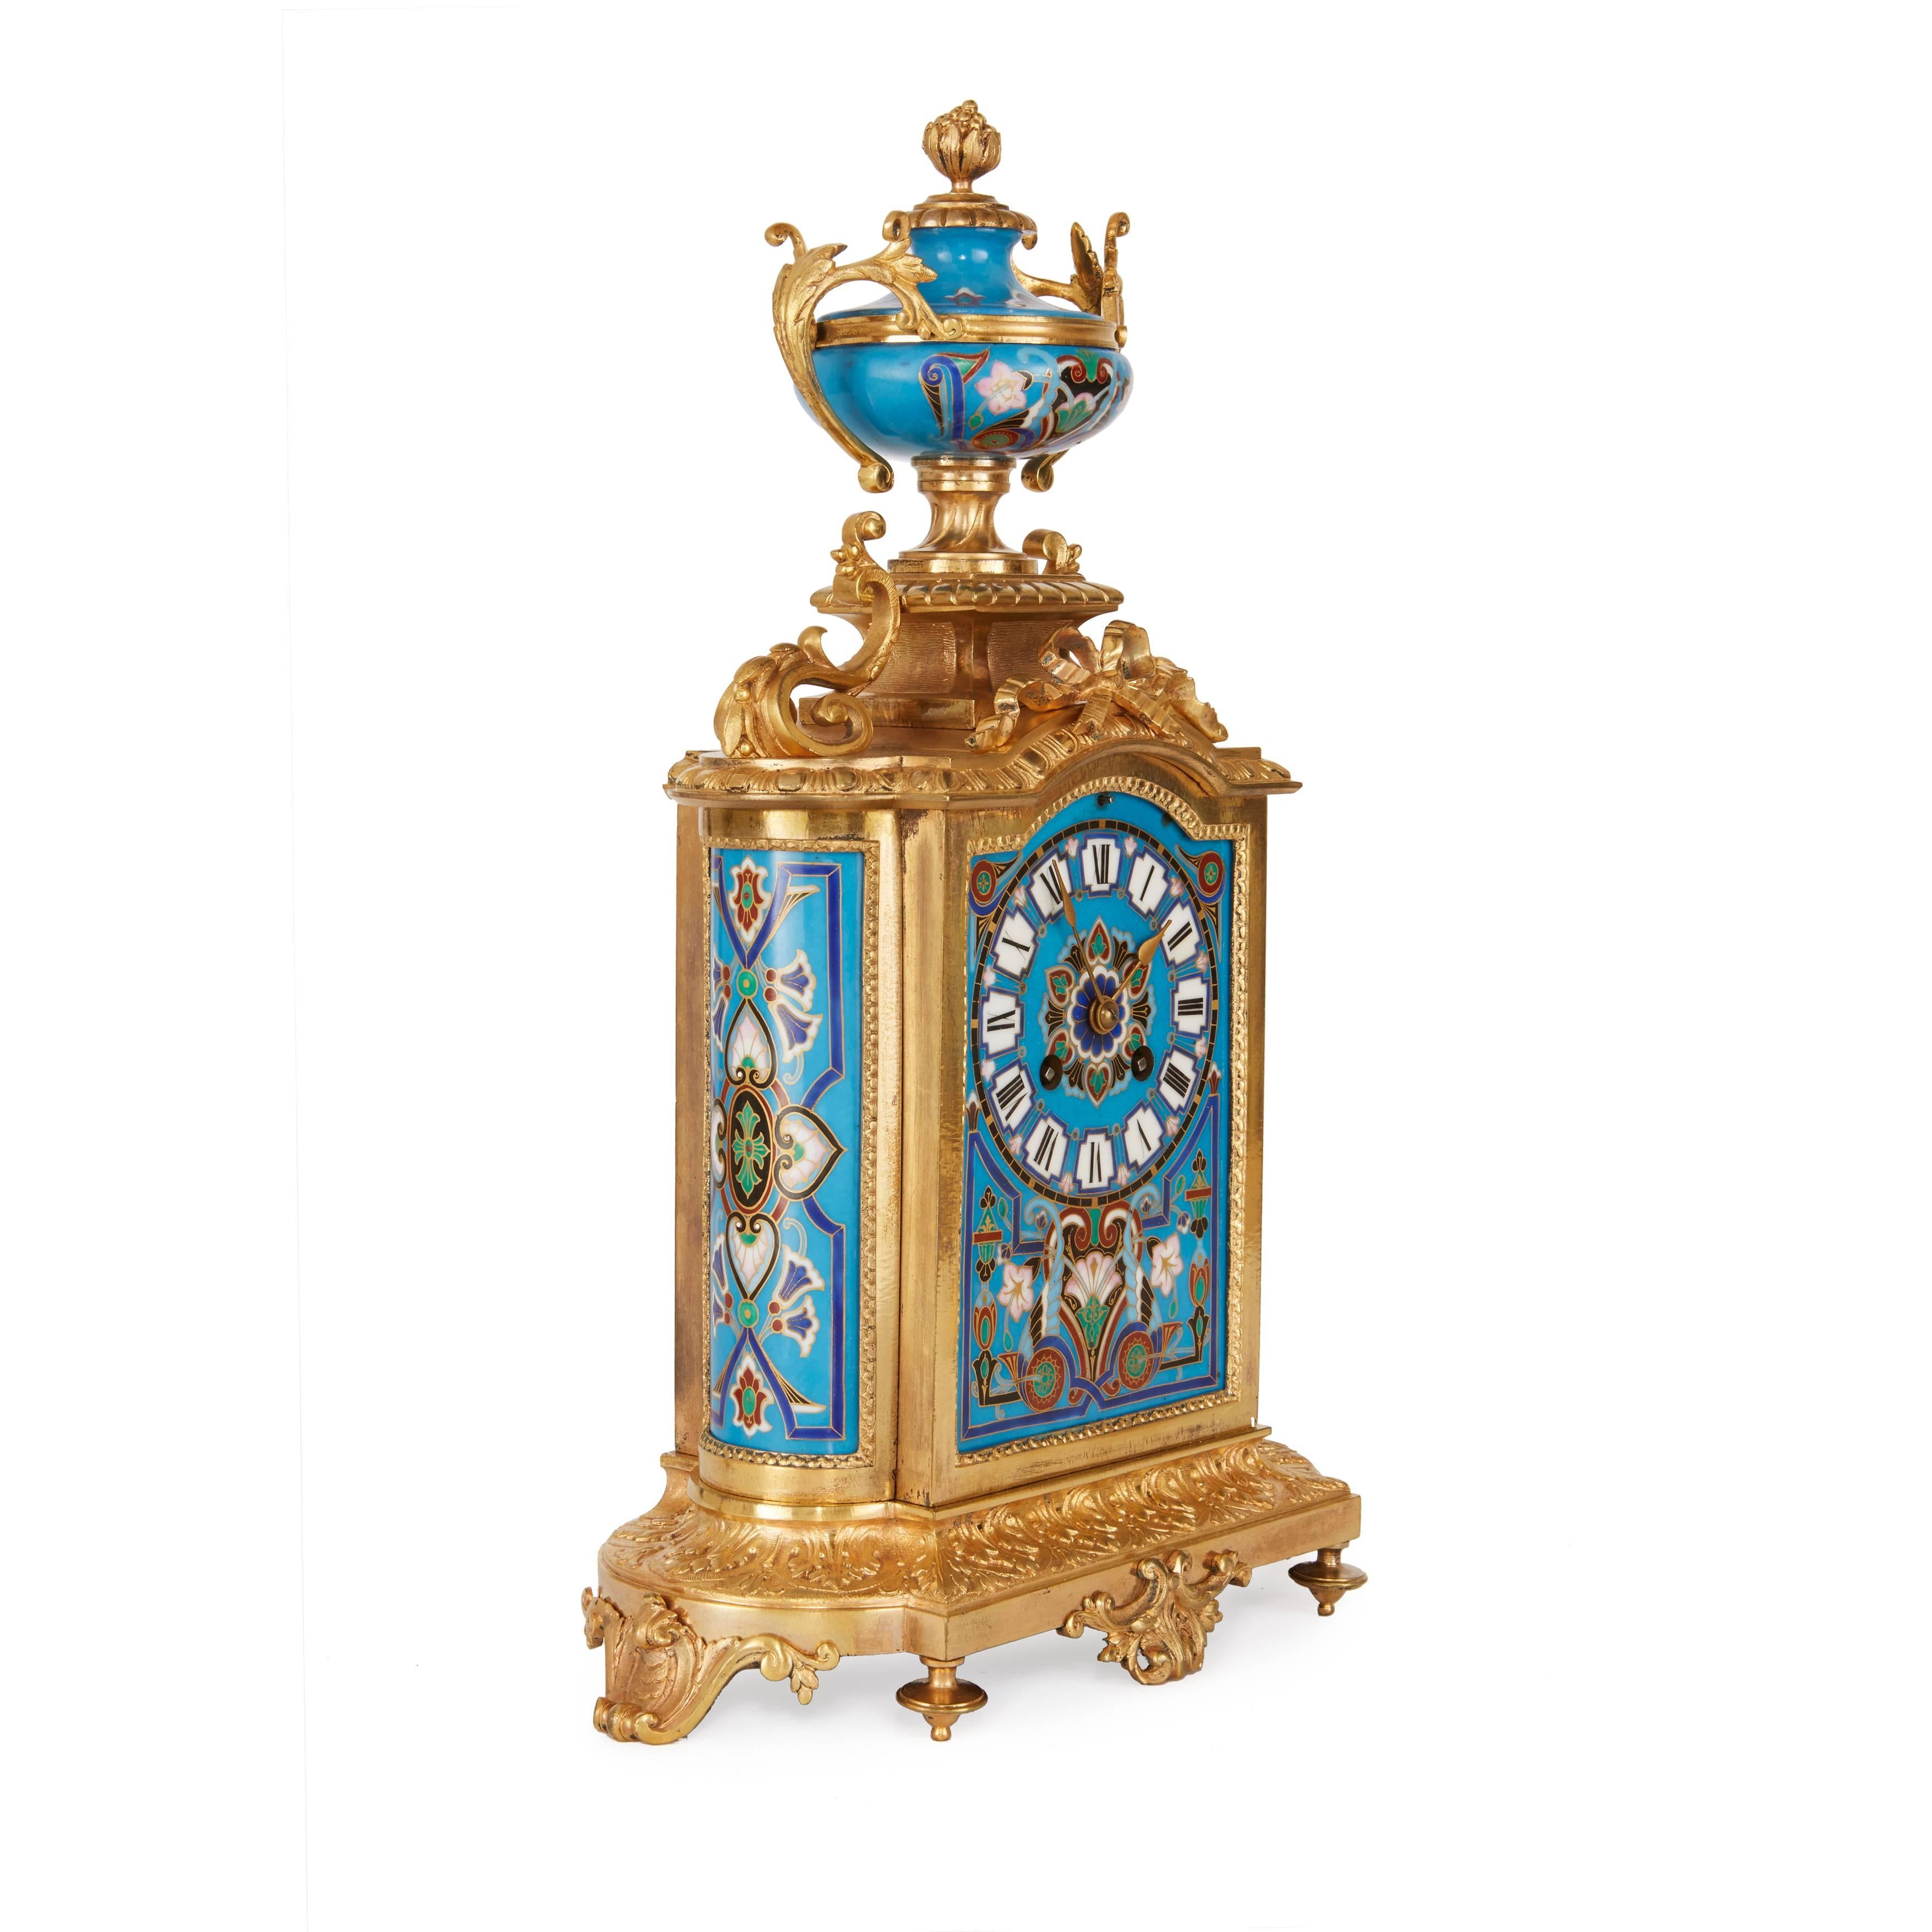 Comprising a central clock and a pair of flanking vases, the clock with central dial set in a panel of porcelain imitating champlevé enamel with geometric design on turquoise ground with an urn surmount, all set on a foliate ormolu breakfront